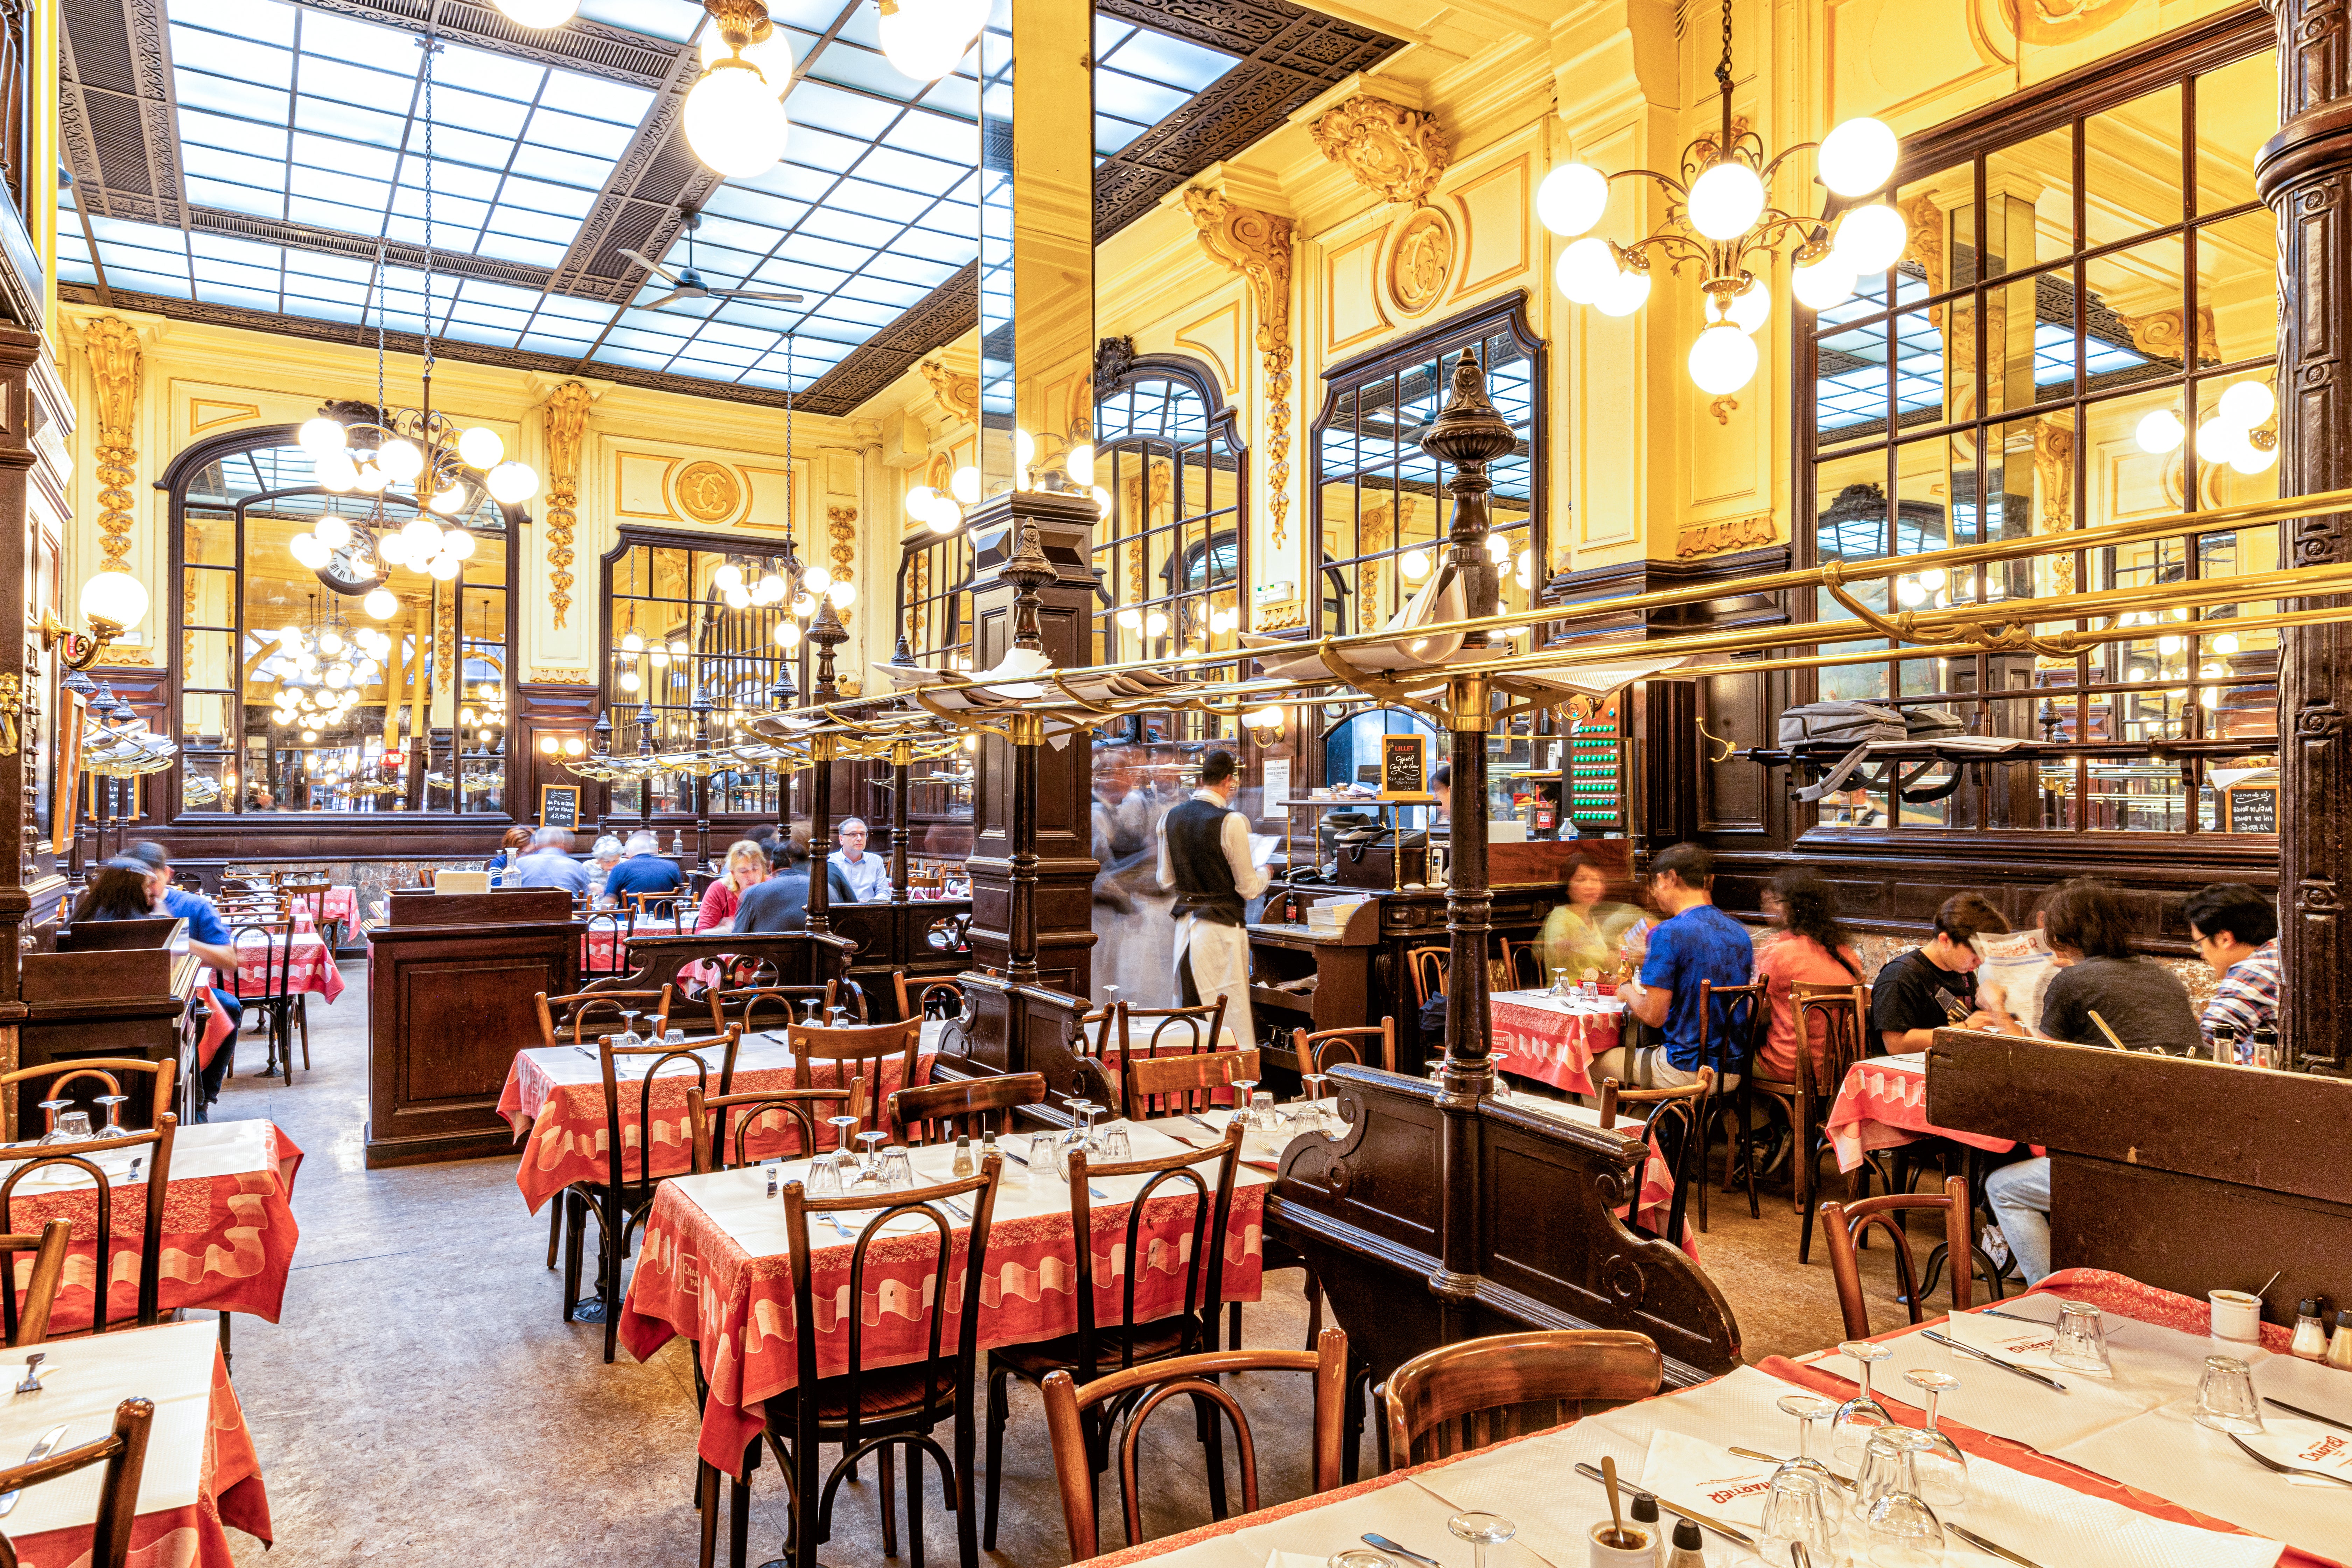 Bouillon restaurants, which first emerged in the late 19th and early 20th centuries, are enjoying a resurgence